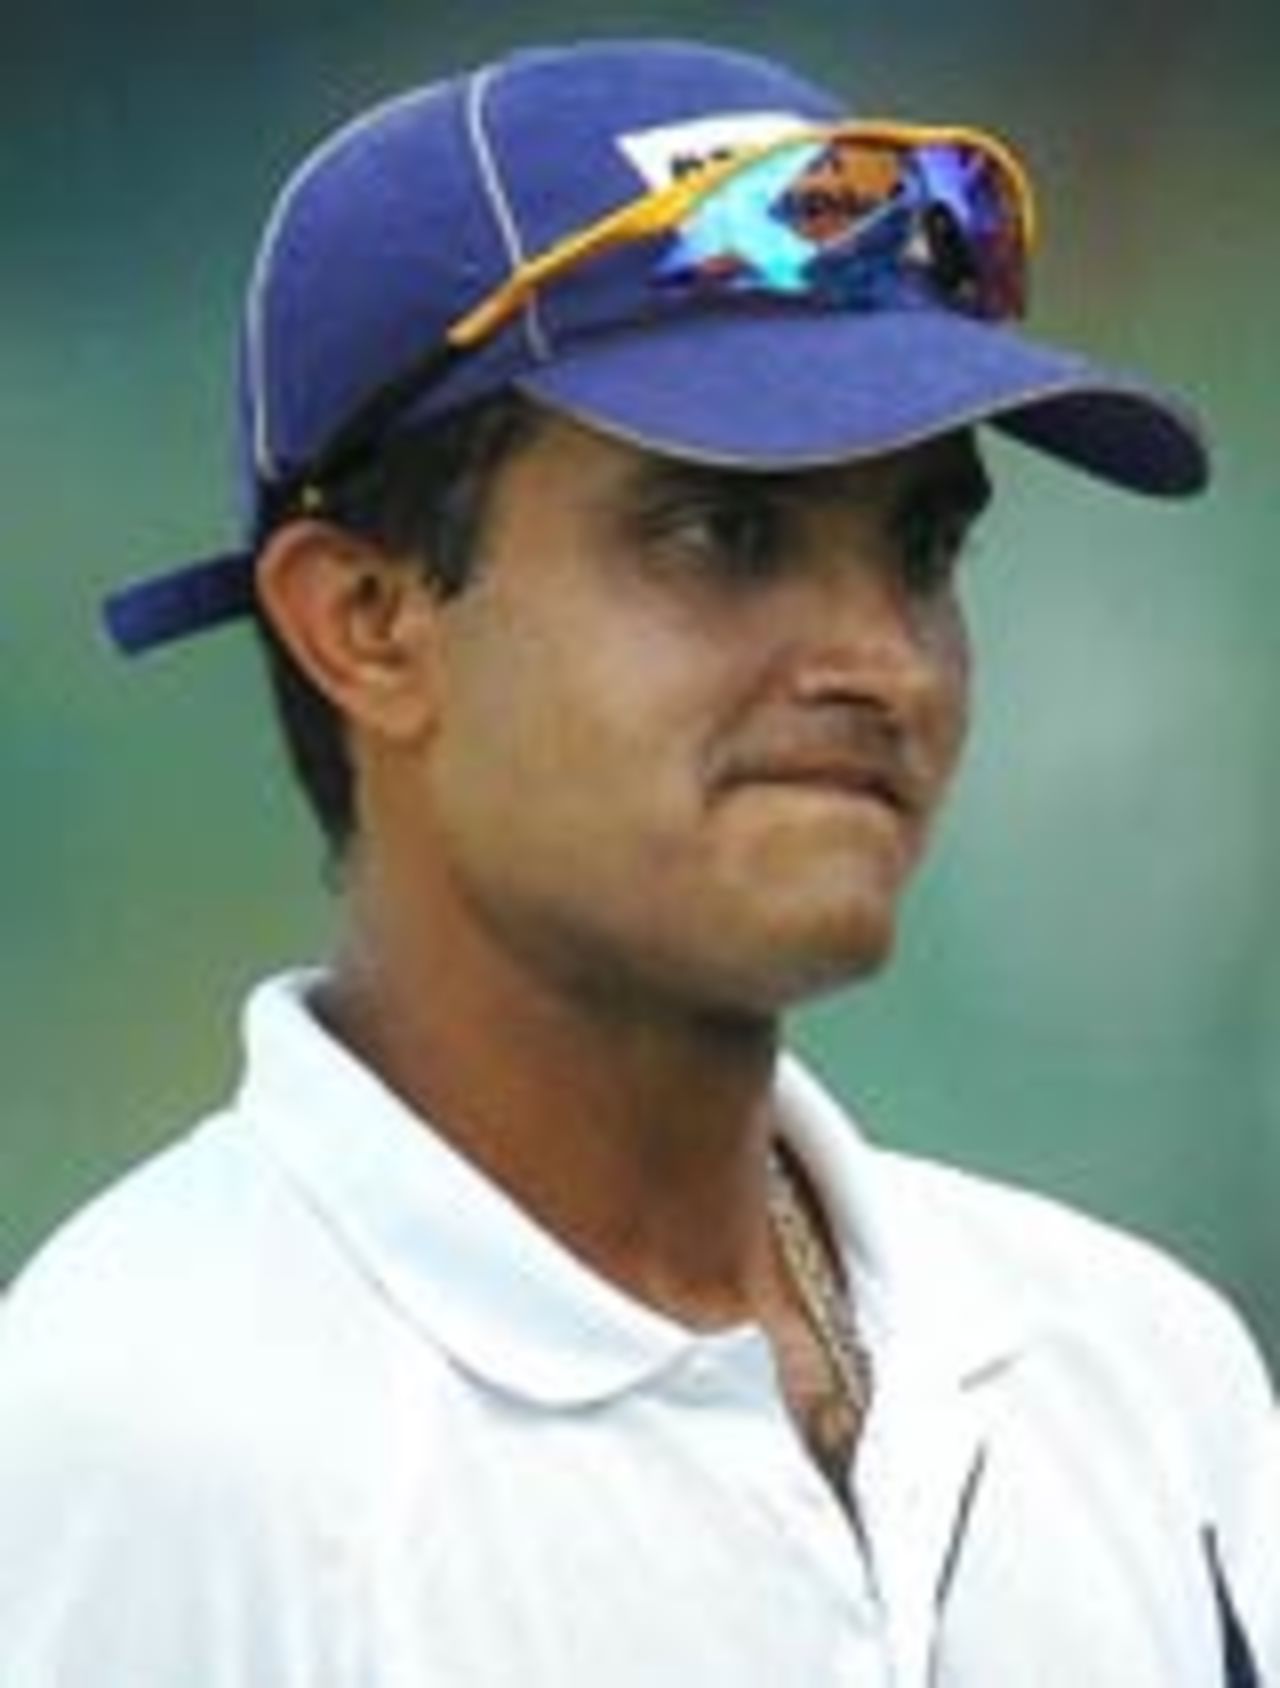 Sourav Ganguly in practice in Colombo ahead of Tuesday's Asia Cup match against Sri Lanka, July 26, 2004